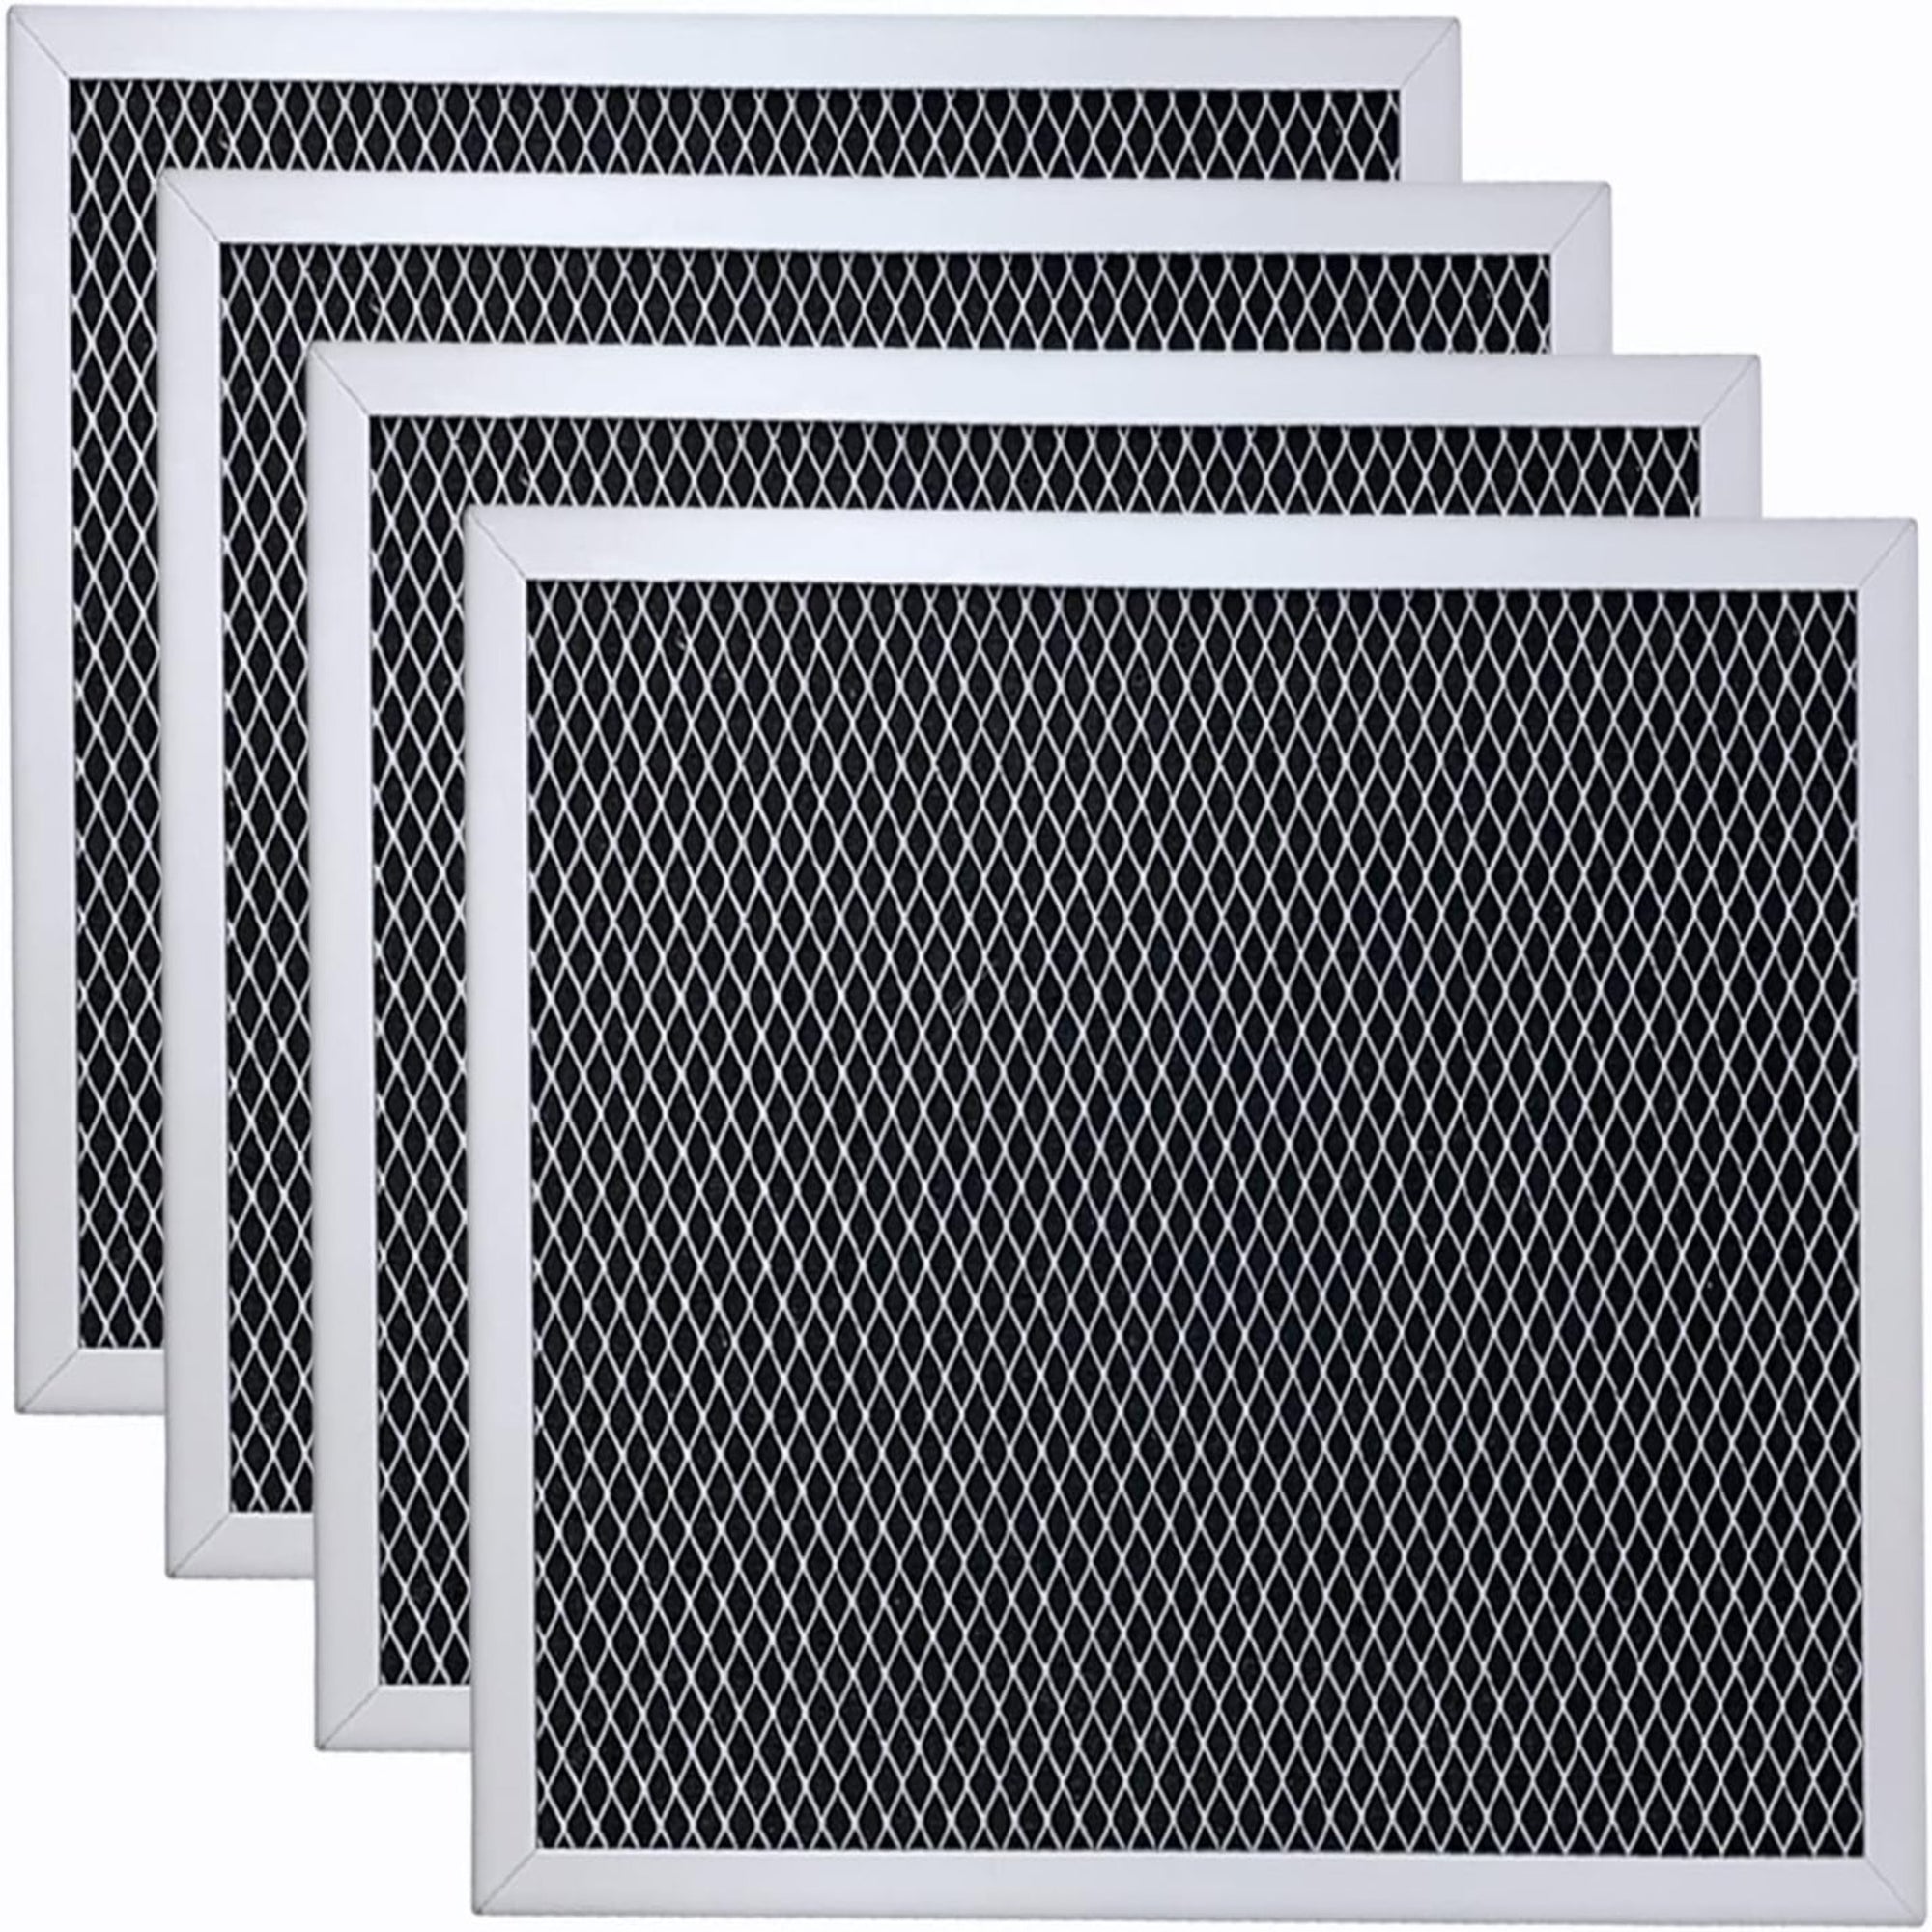 Nispira Grease Range Hood Filter with Activated Charcoal Compatible with Broan 97007696, S97007696, 6105C, 1172266, 41F. Removes Odor